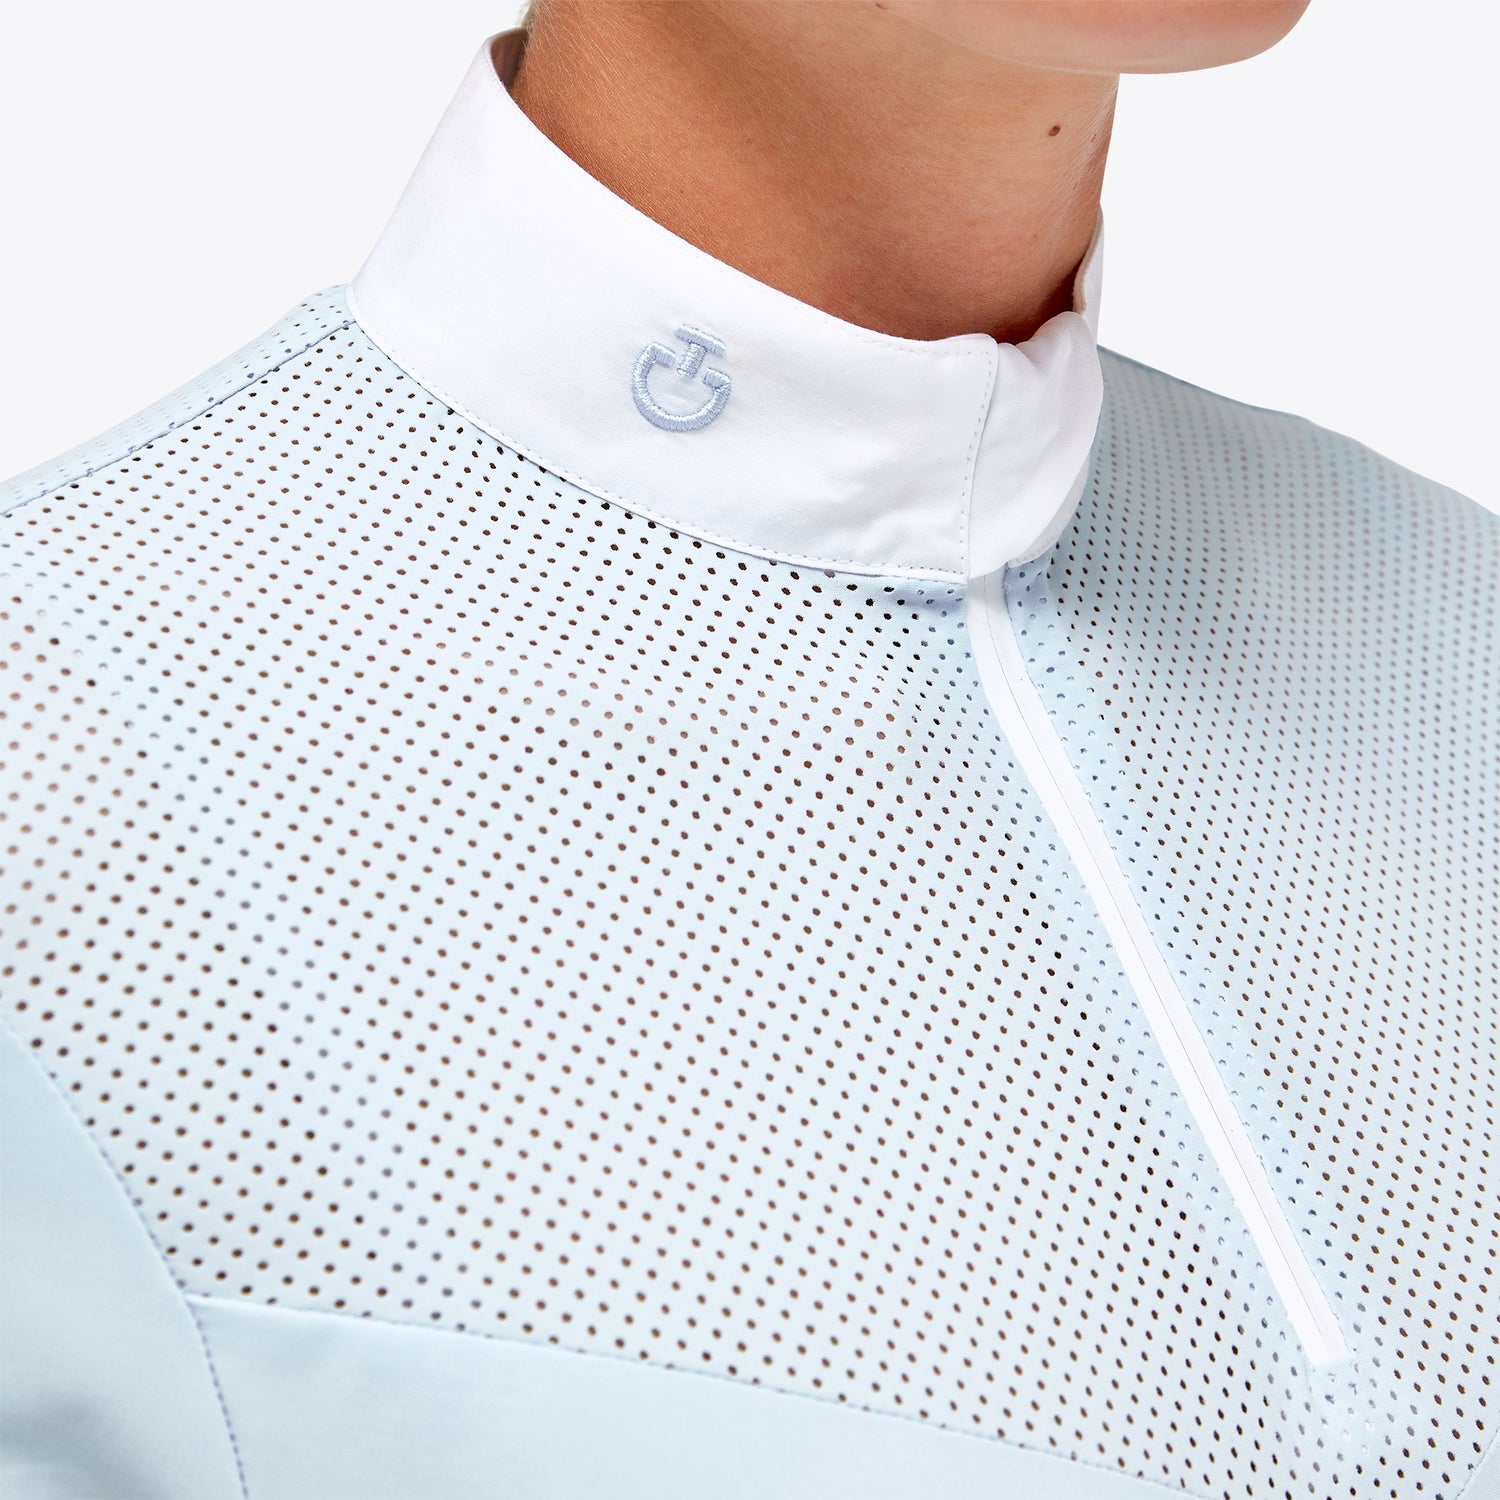 Perforated equestrian summer show shirt